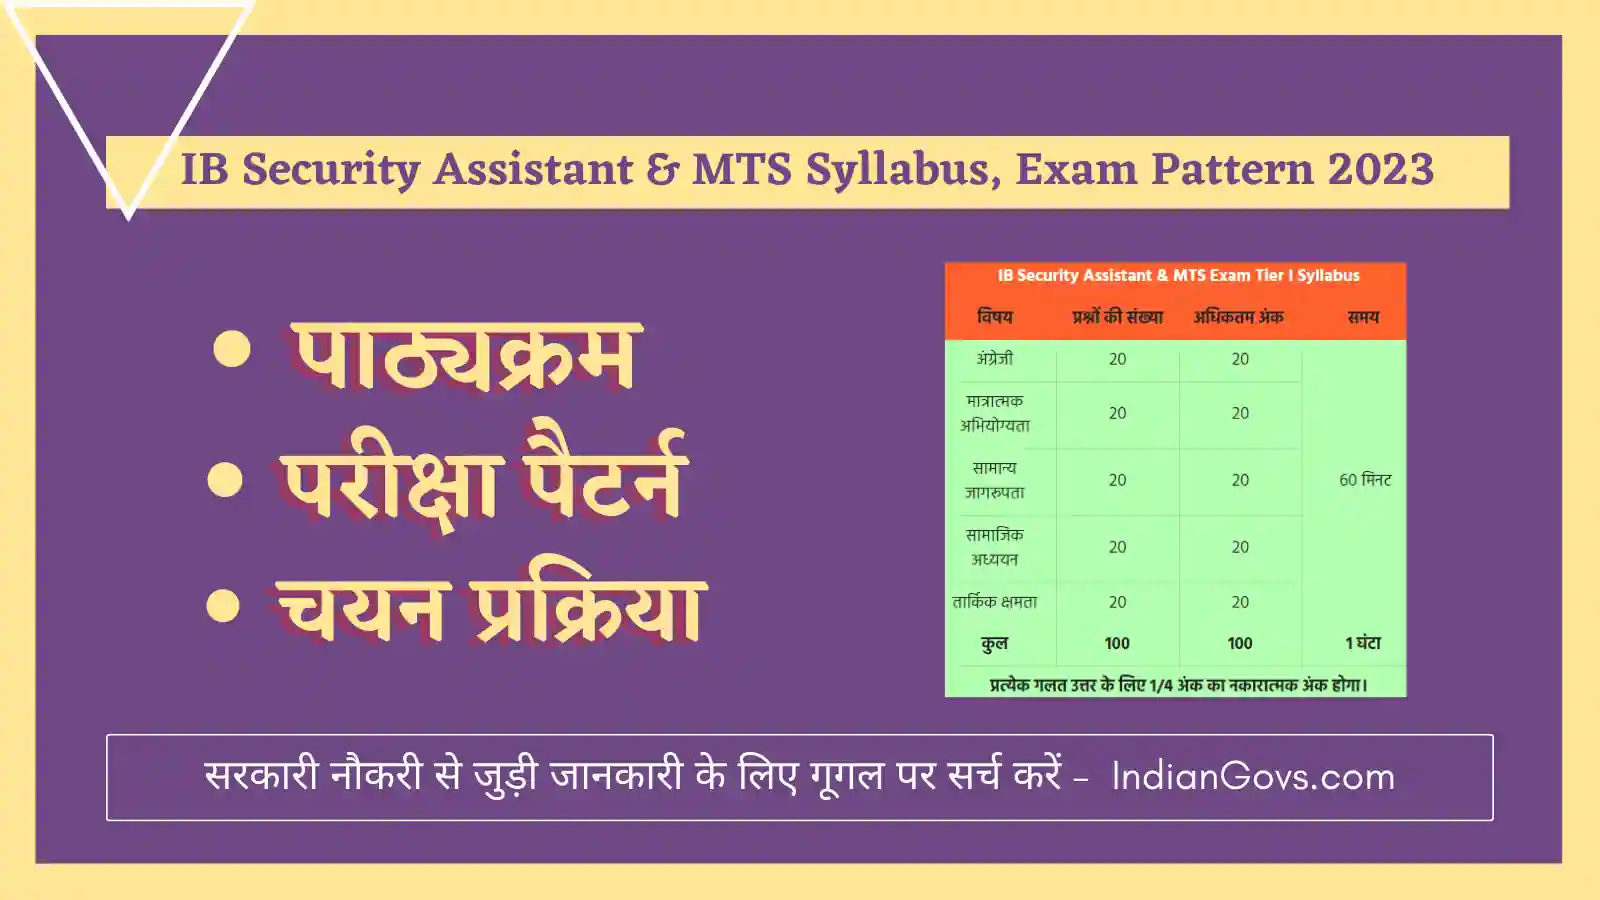 IB Security Assistant & MTS Syllabus, Exam Pattern & Selection Process 2023 in Hindi